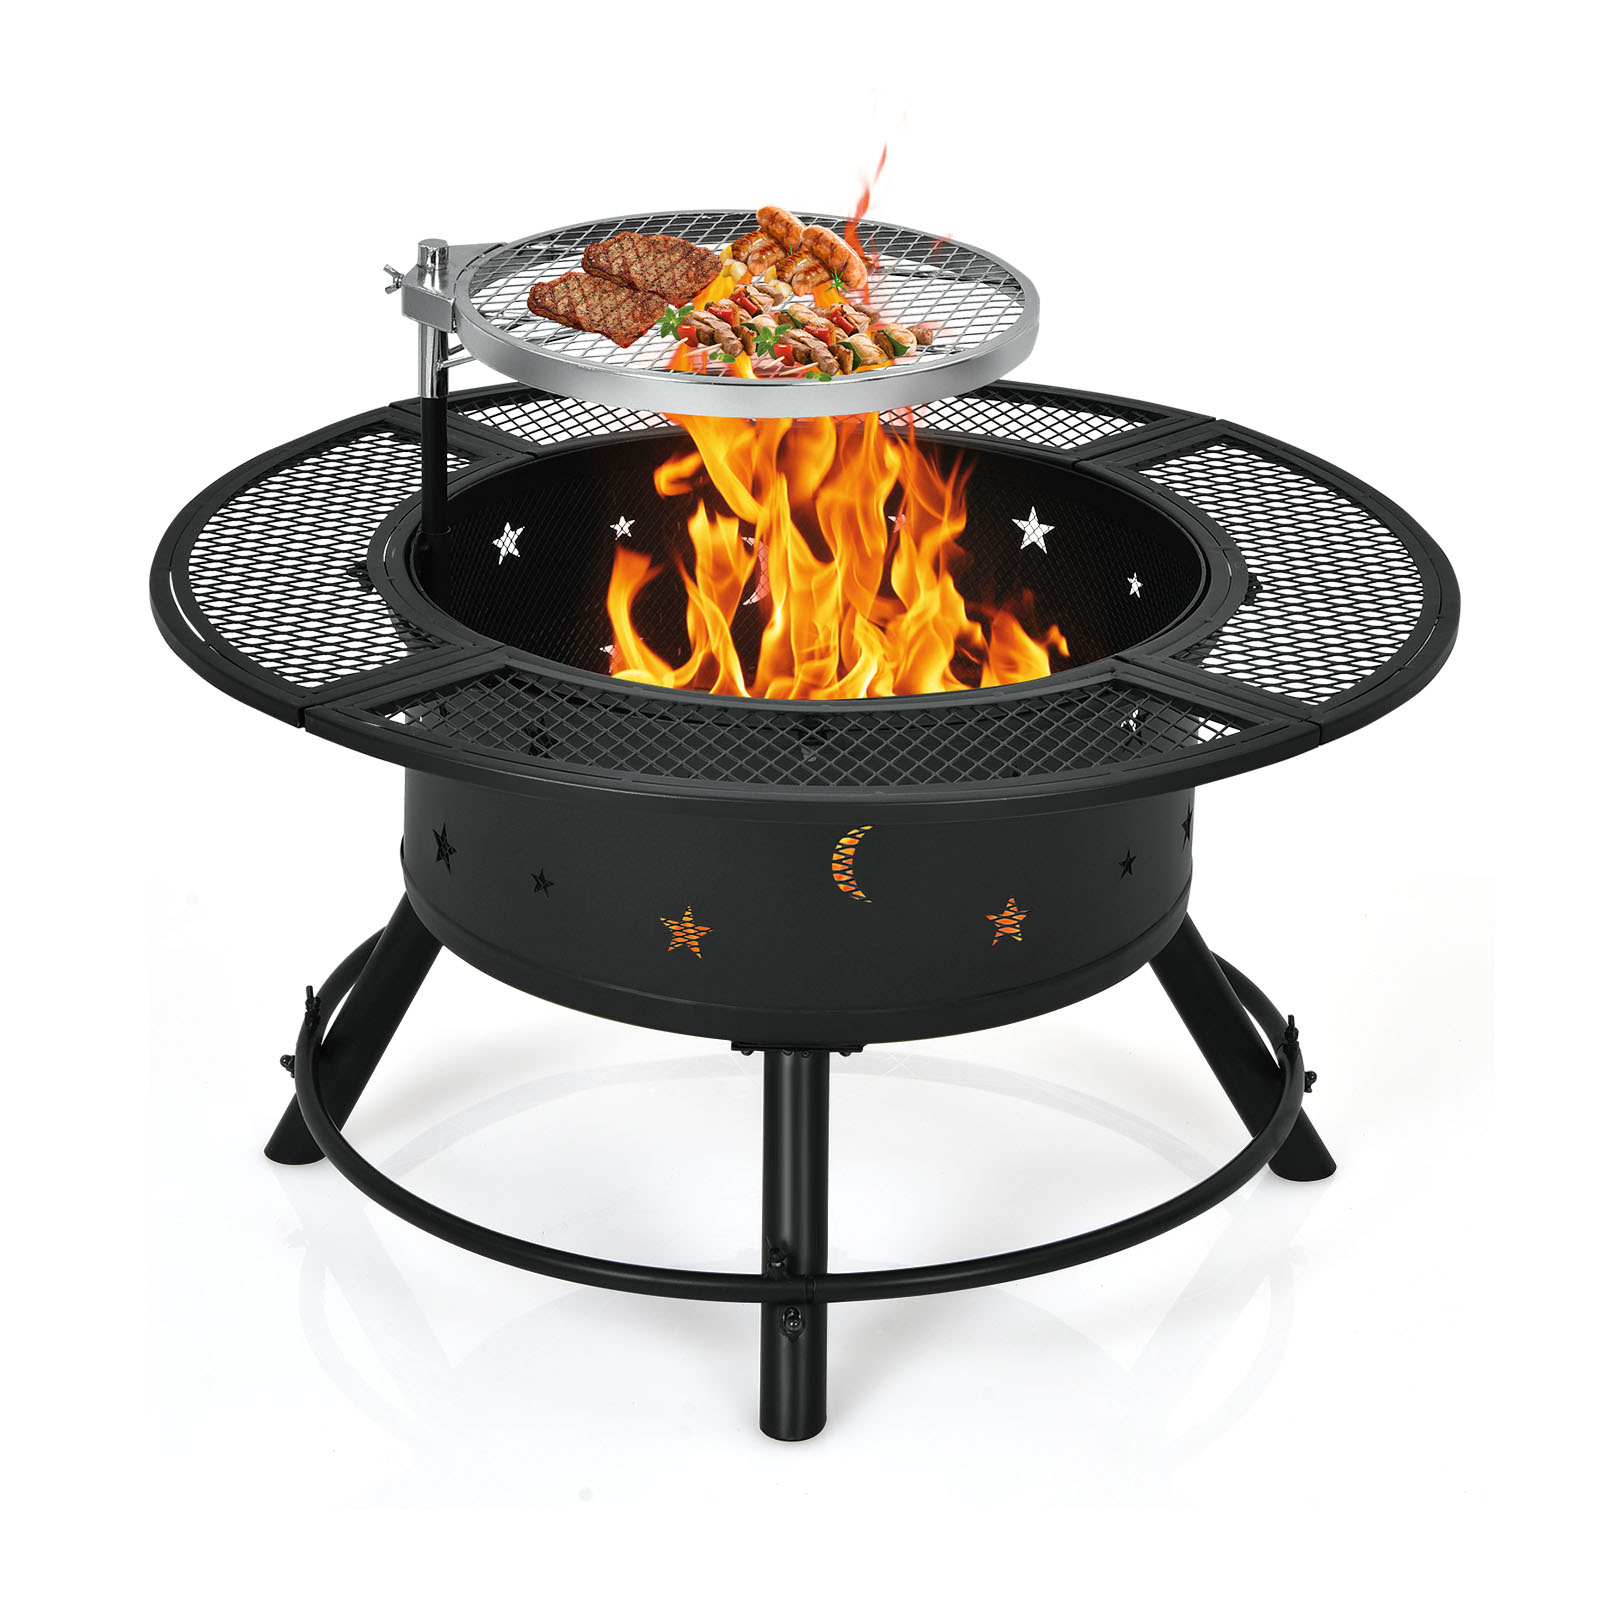 Topbuy 2-in-1 Fire Pit with Cooking Grate 32 Inch Outdoor Wood Burning  Firepit Bowl with Swivel BBQ Grill